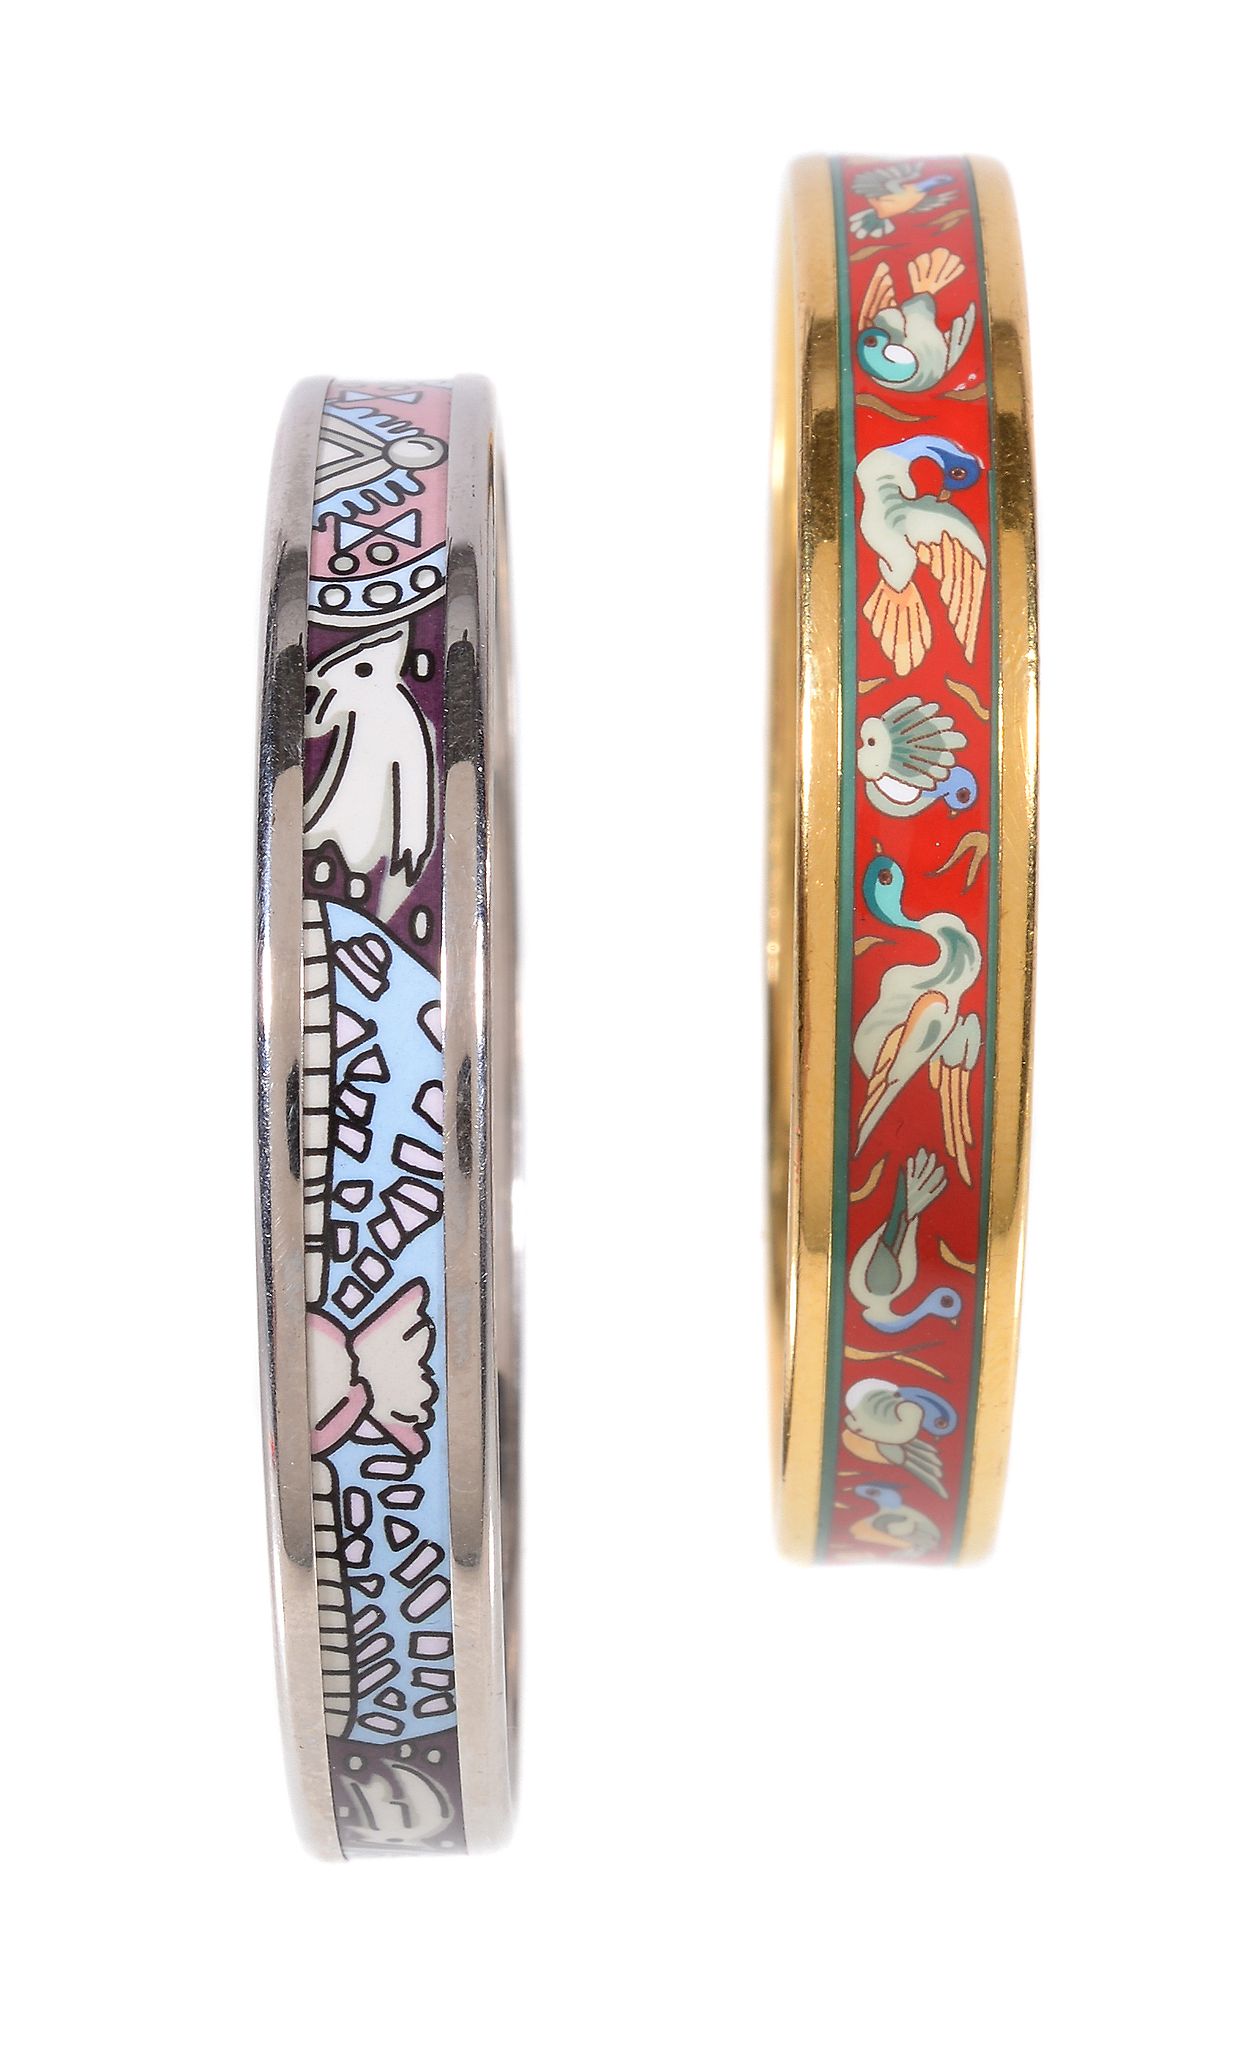 Hermes, two gilt metal and enamel bangles, ducks on a red ground and stylised artwork, each 6.5cm - Image 2 of 2